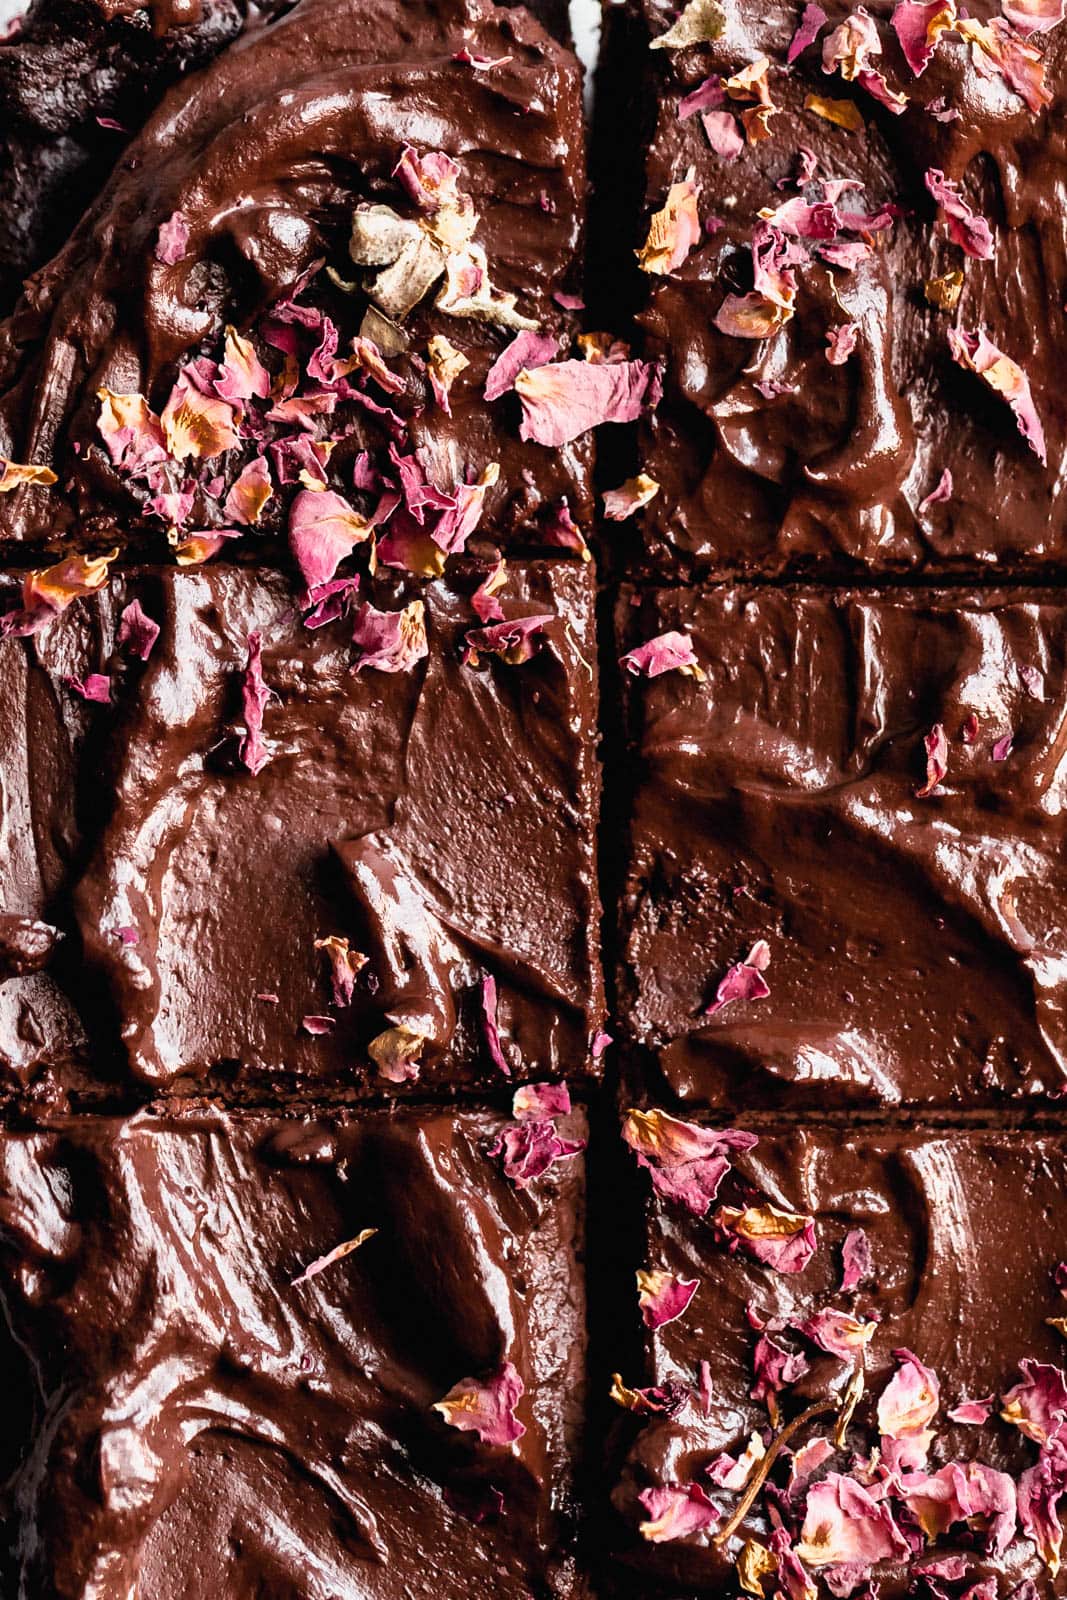 The most epic Raw Vegan Brownies that have this non-vegan questioning EVERYTHING. Bonus: they're gluten free and refined sugar free, too!